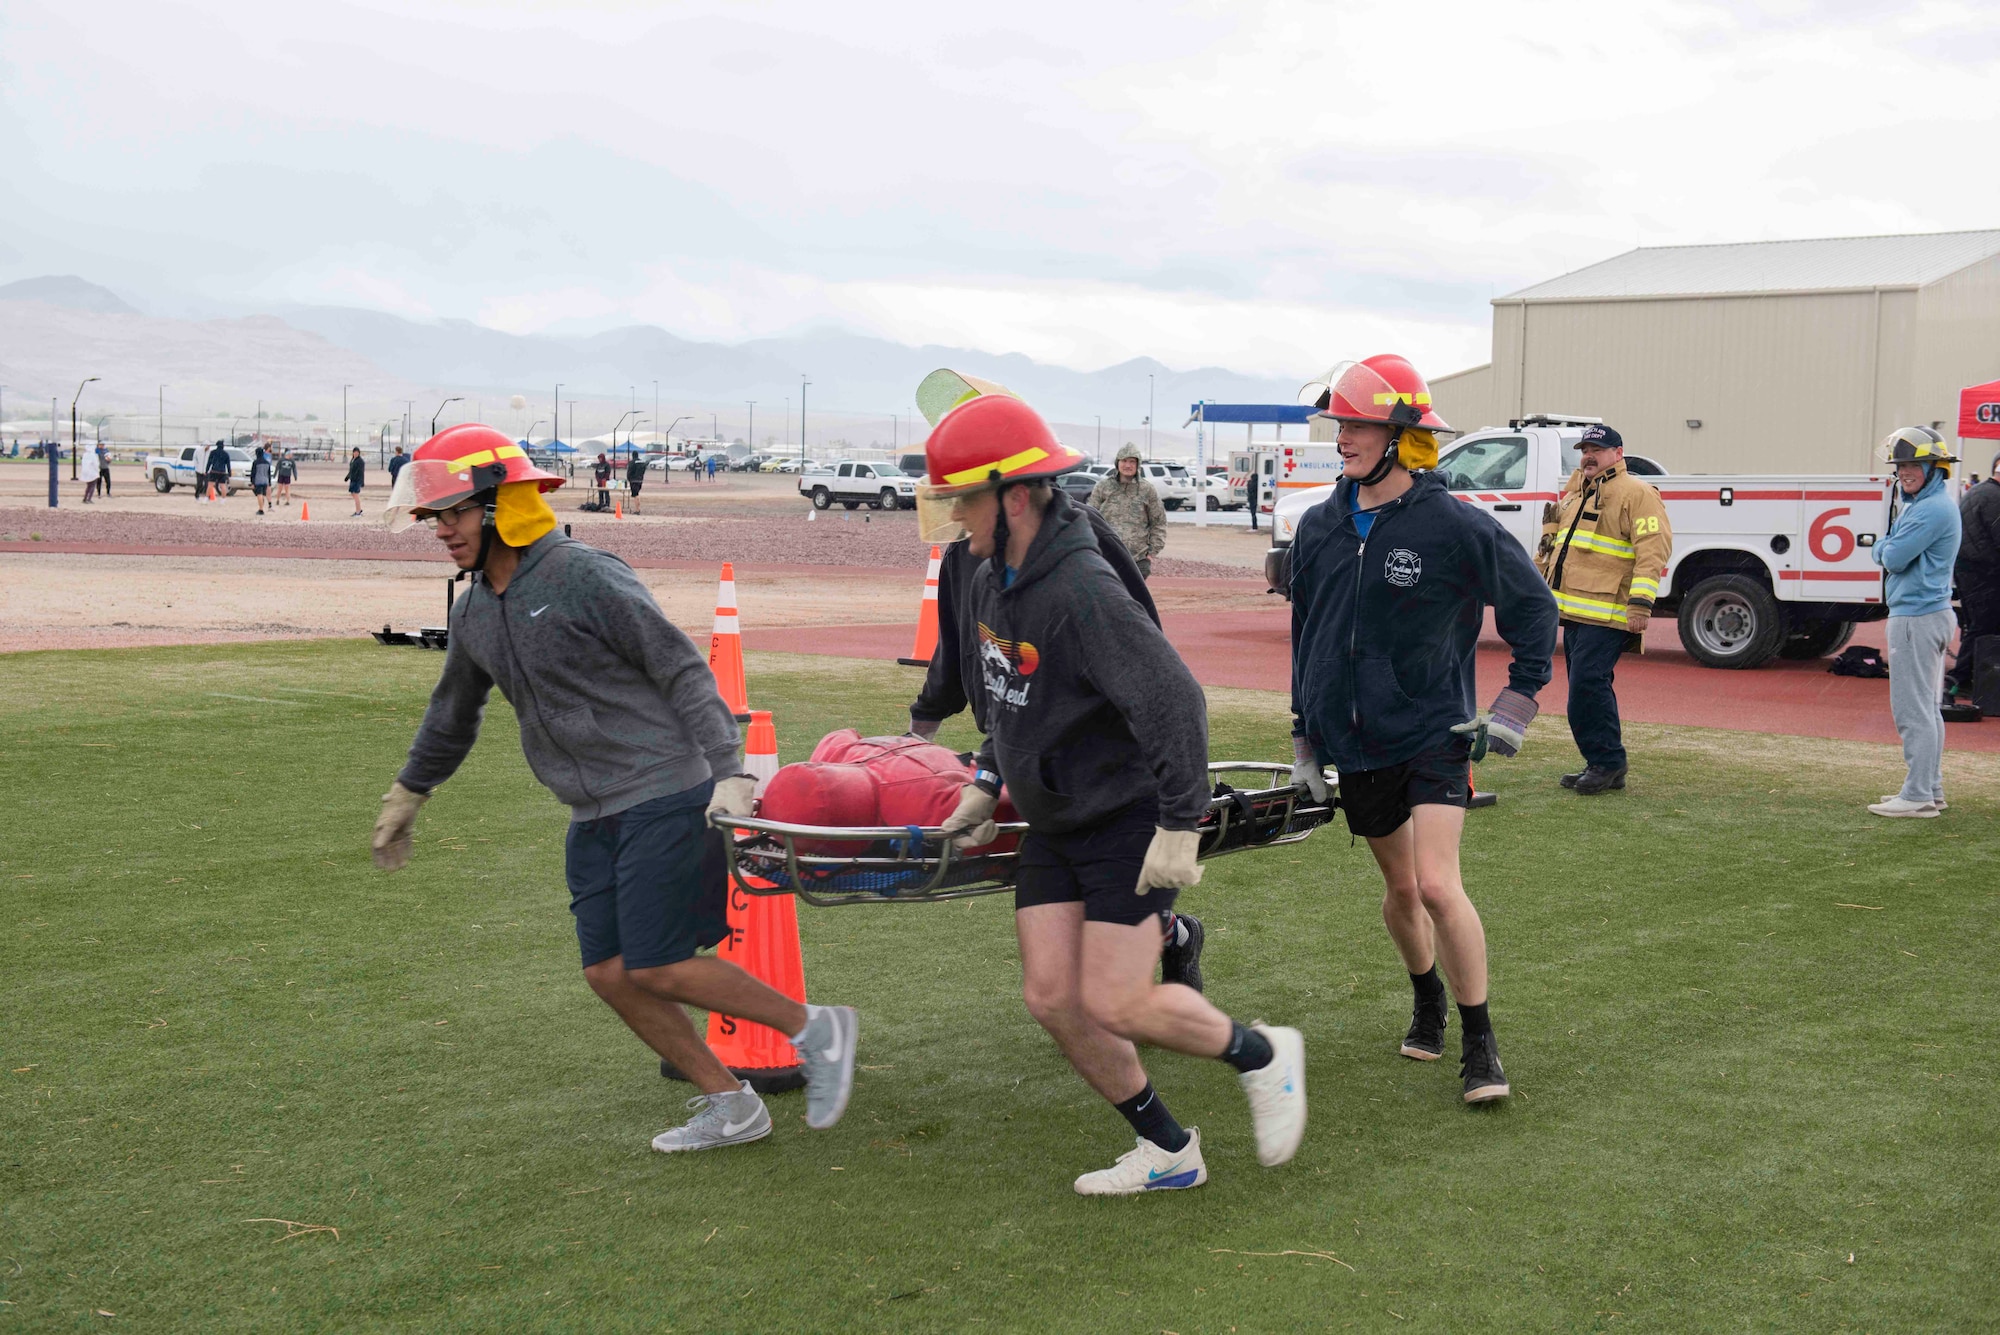 Four Airmen carry a stretcher around an orange cone during a fire muster competition on a turf field.